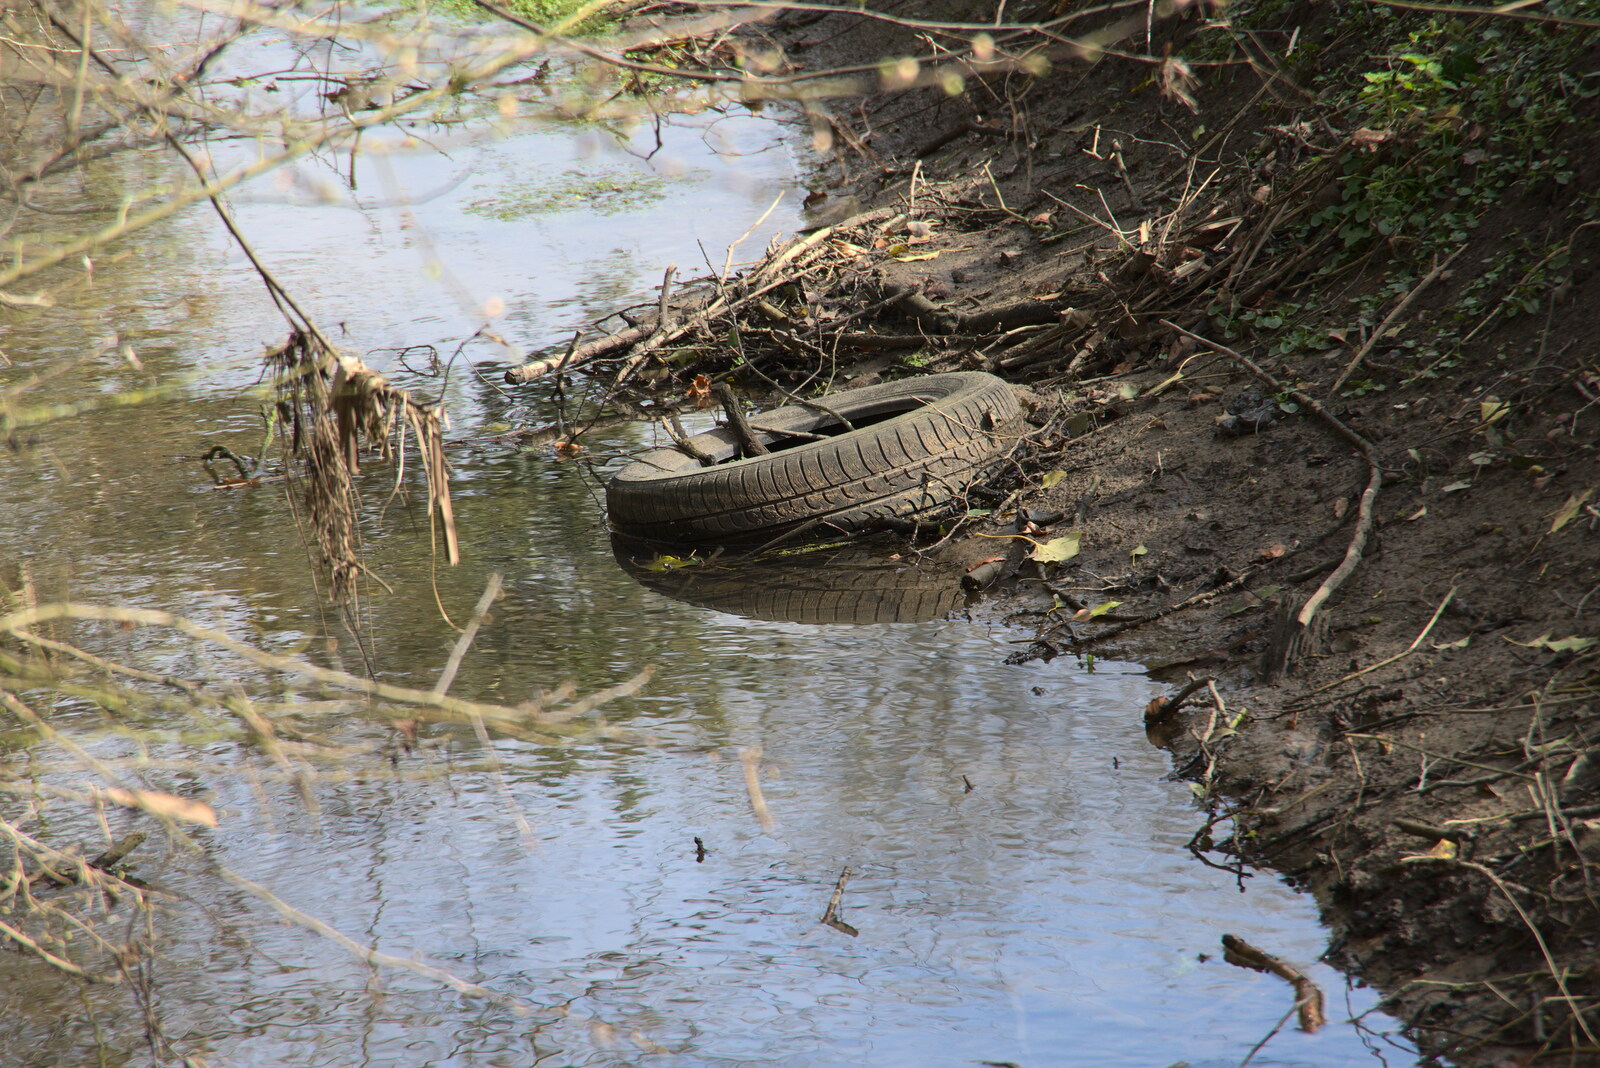 There's a discarded car tyre in the stream from Another Walk on Eye Airfield, Eye, Suffolk - 14th March 2021